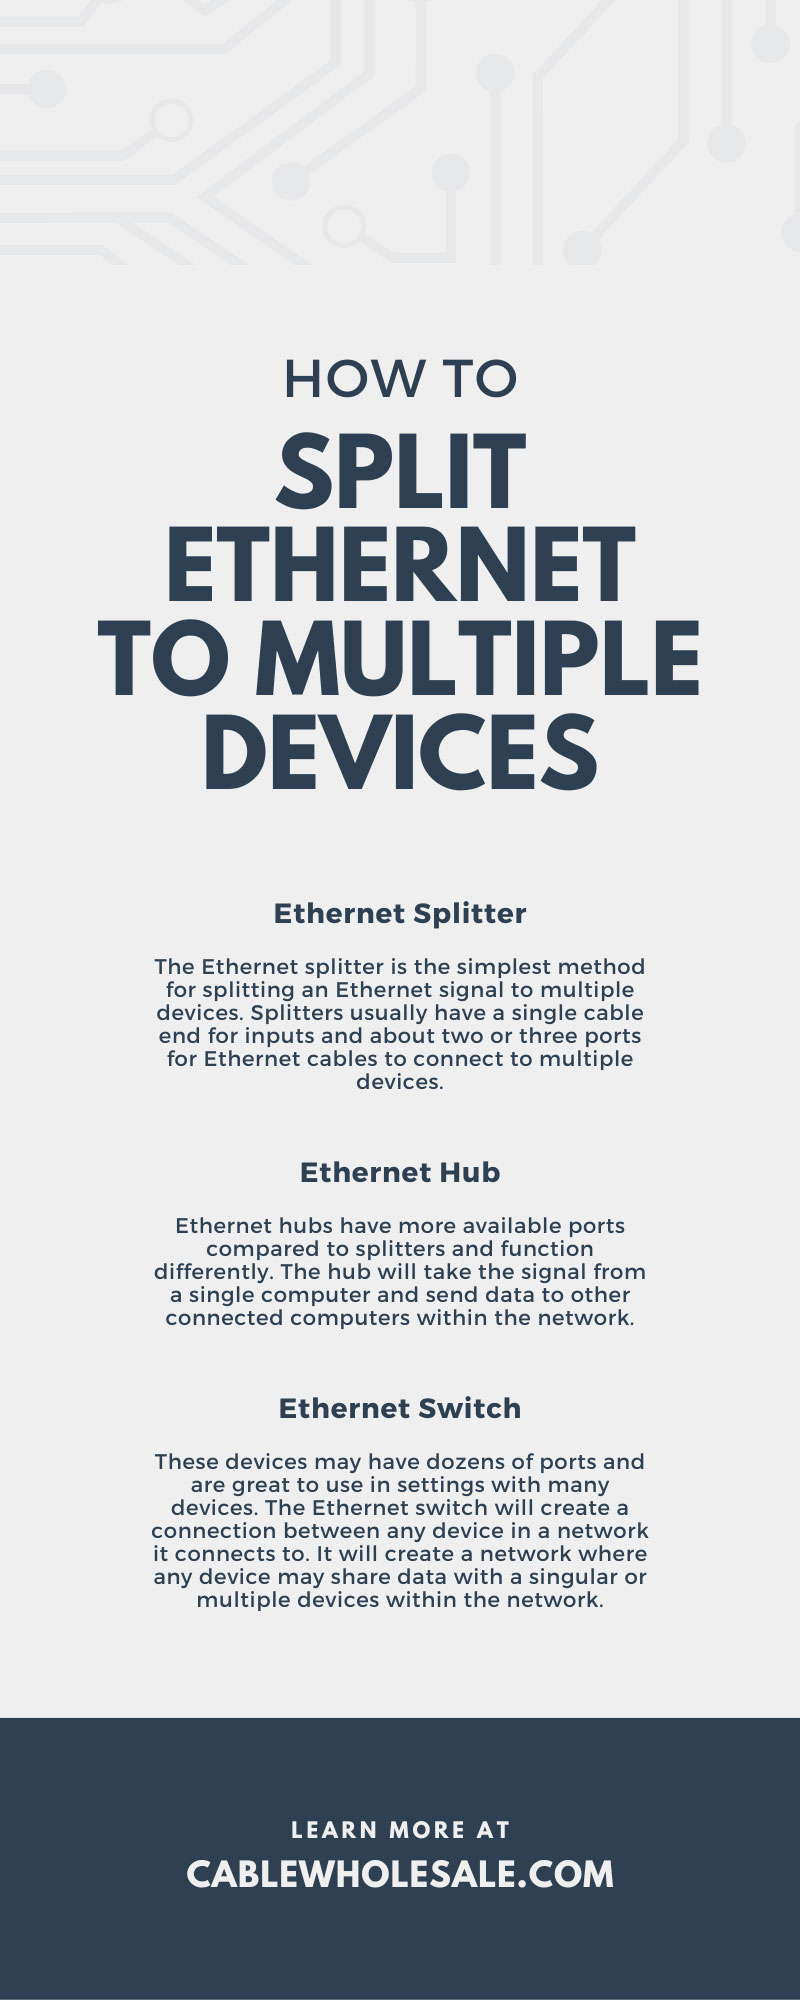 How To Split Ethernet to Multiple Devices